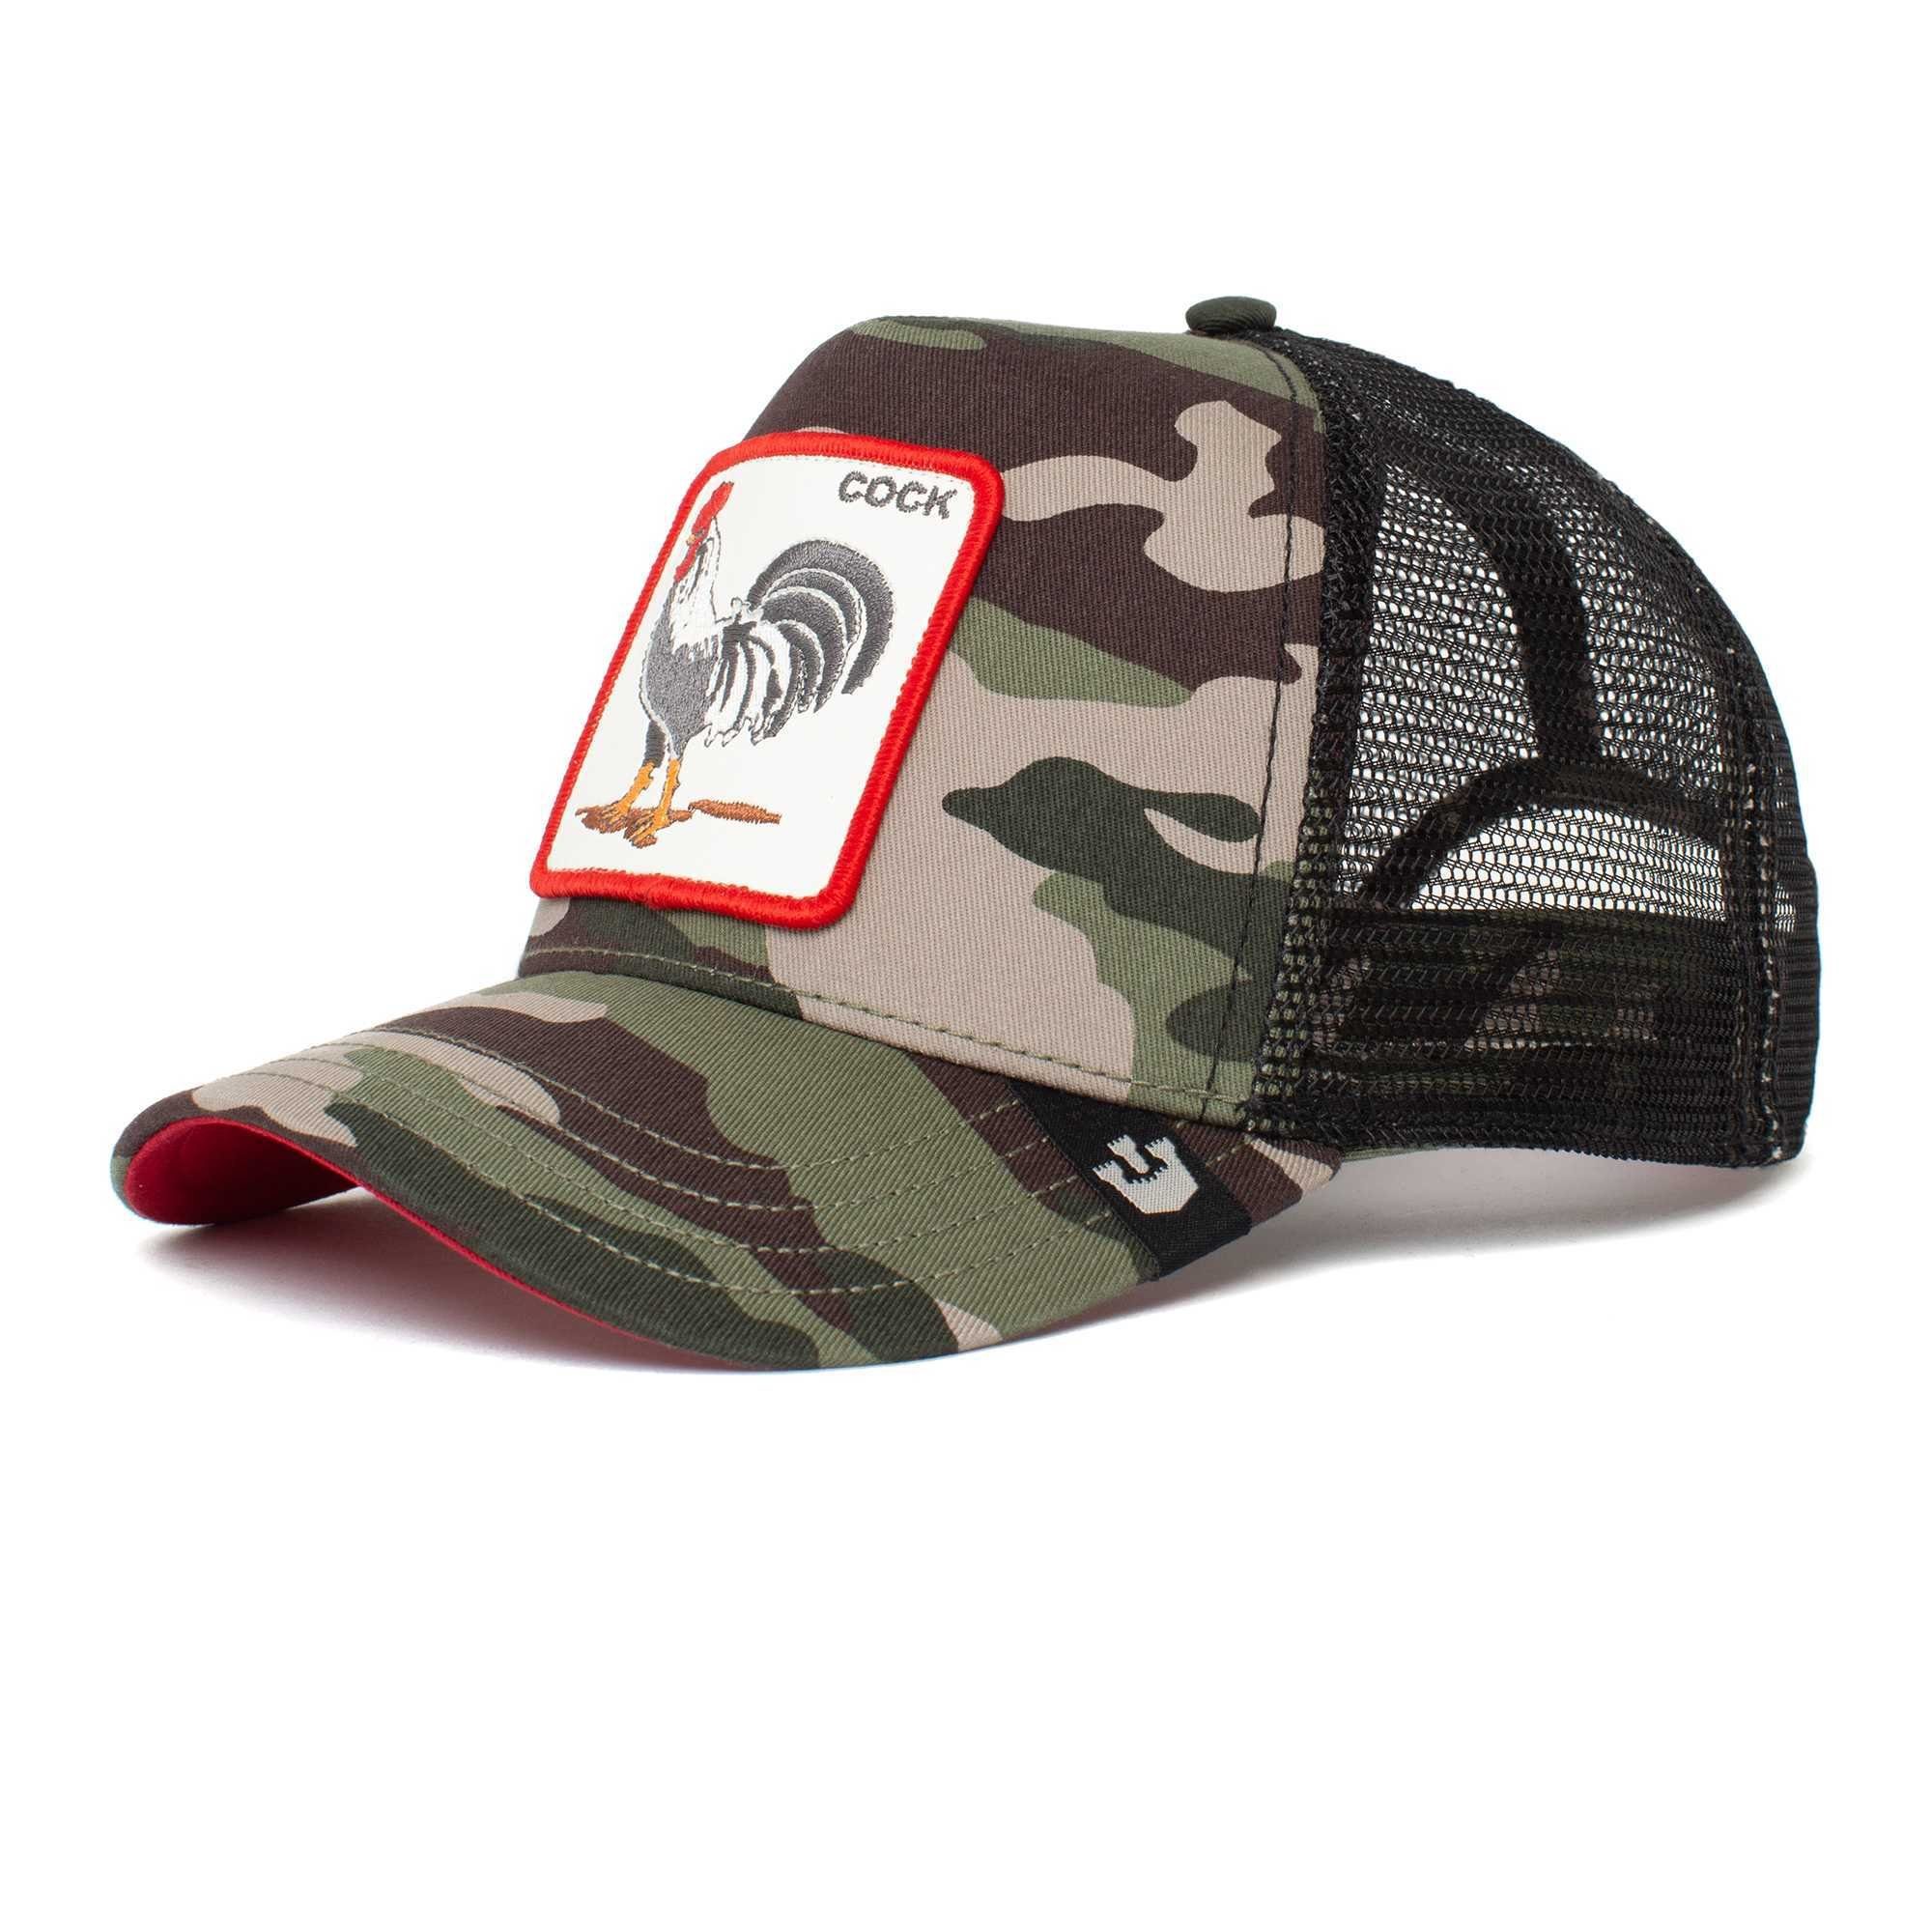 GOORIN Bros. Baseball Cap Unisex Trucker Cap - Kappe, Frontpatch, One Size The Rooster